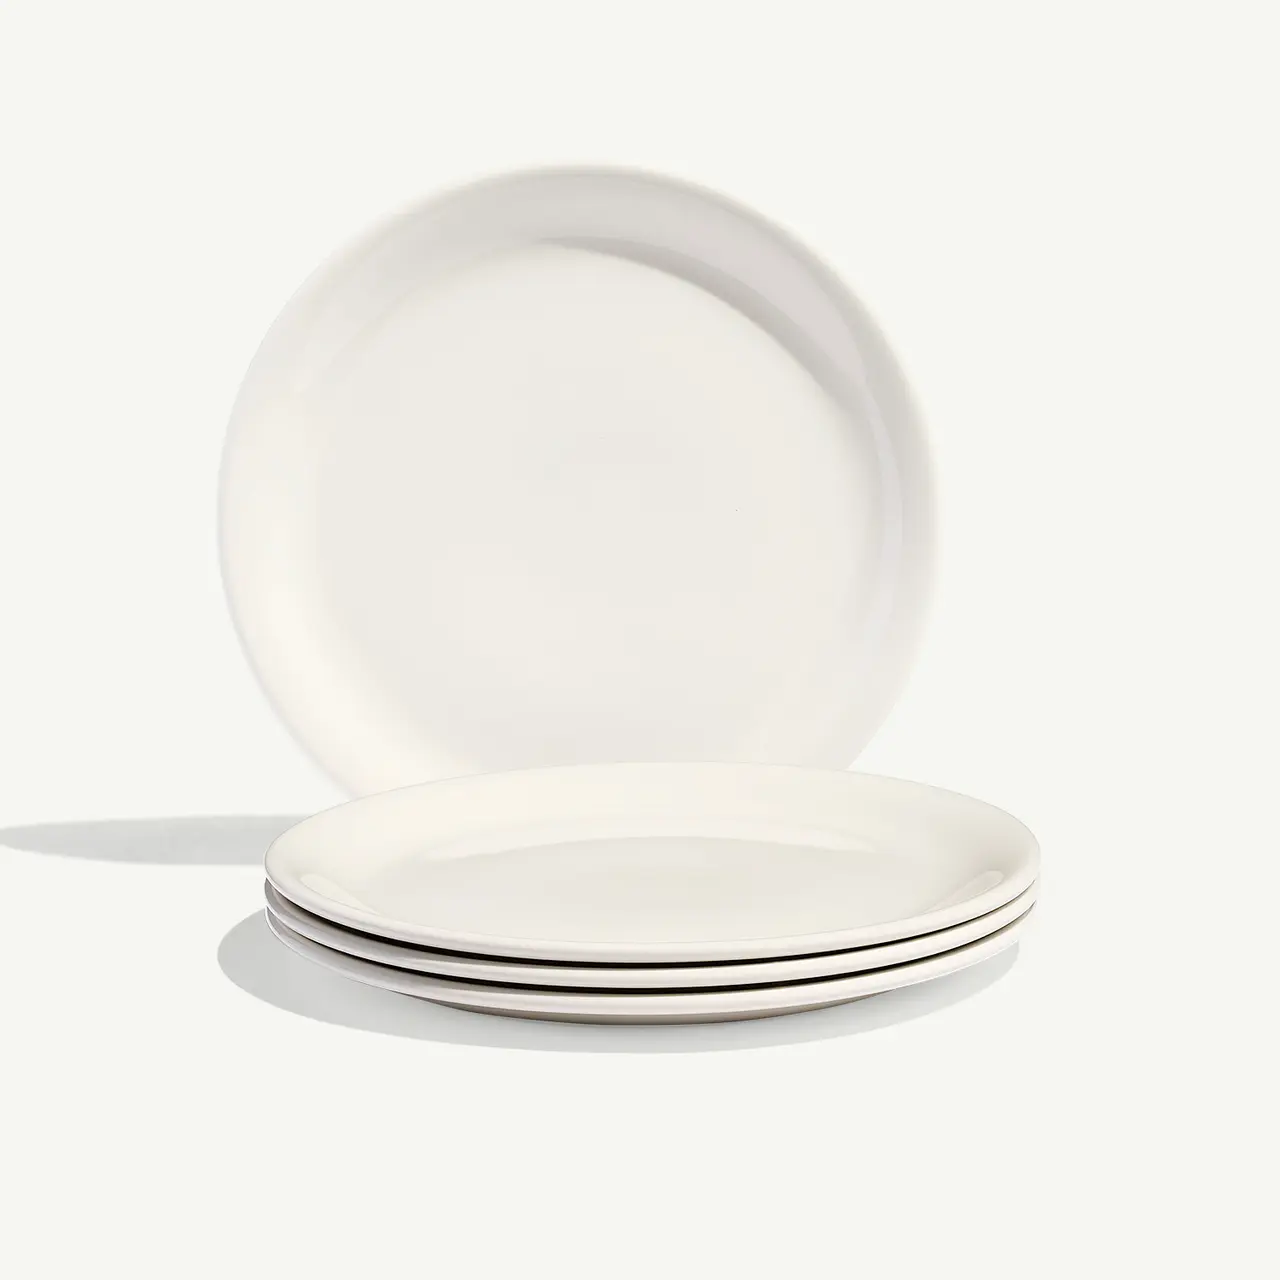 Three stacked white plates are presented against a plain background.